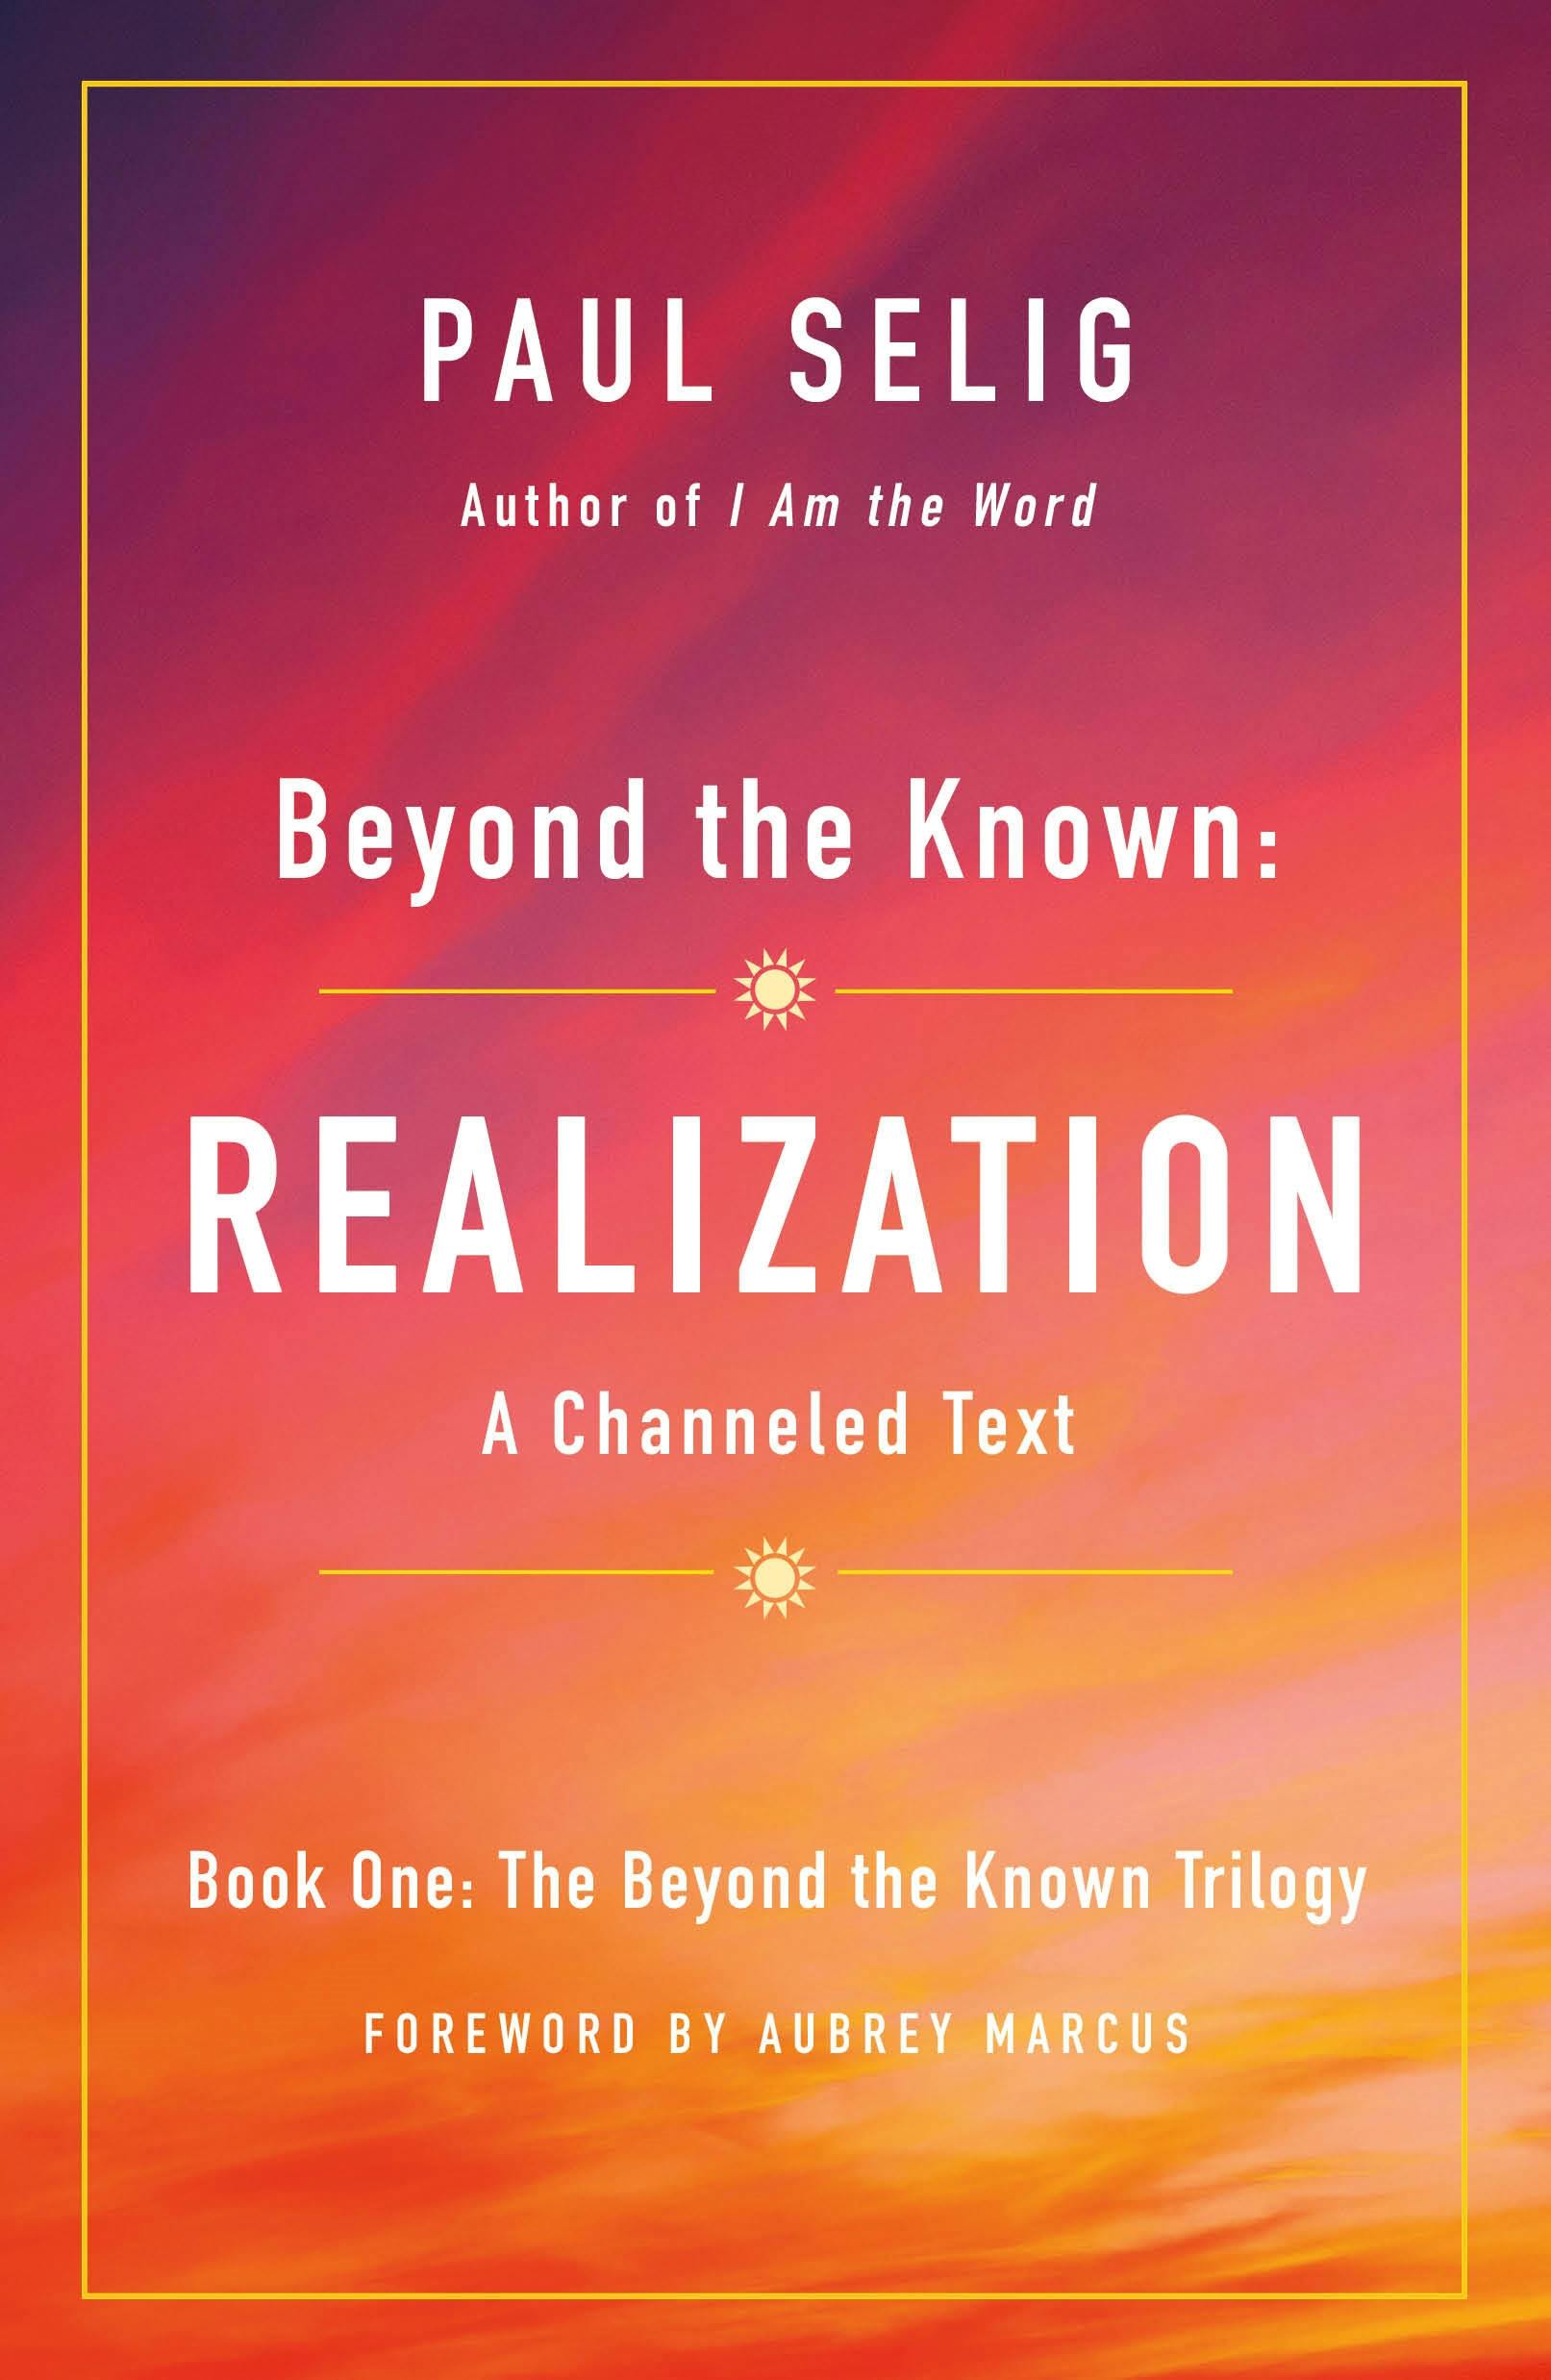 Beyond the Known: Realization